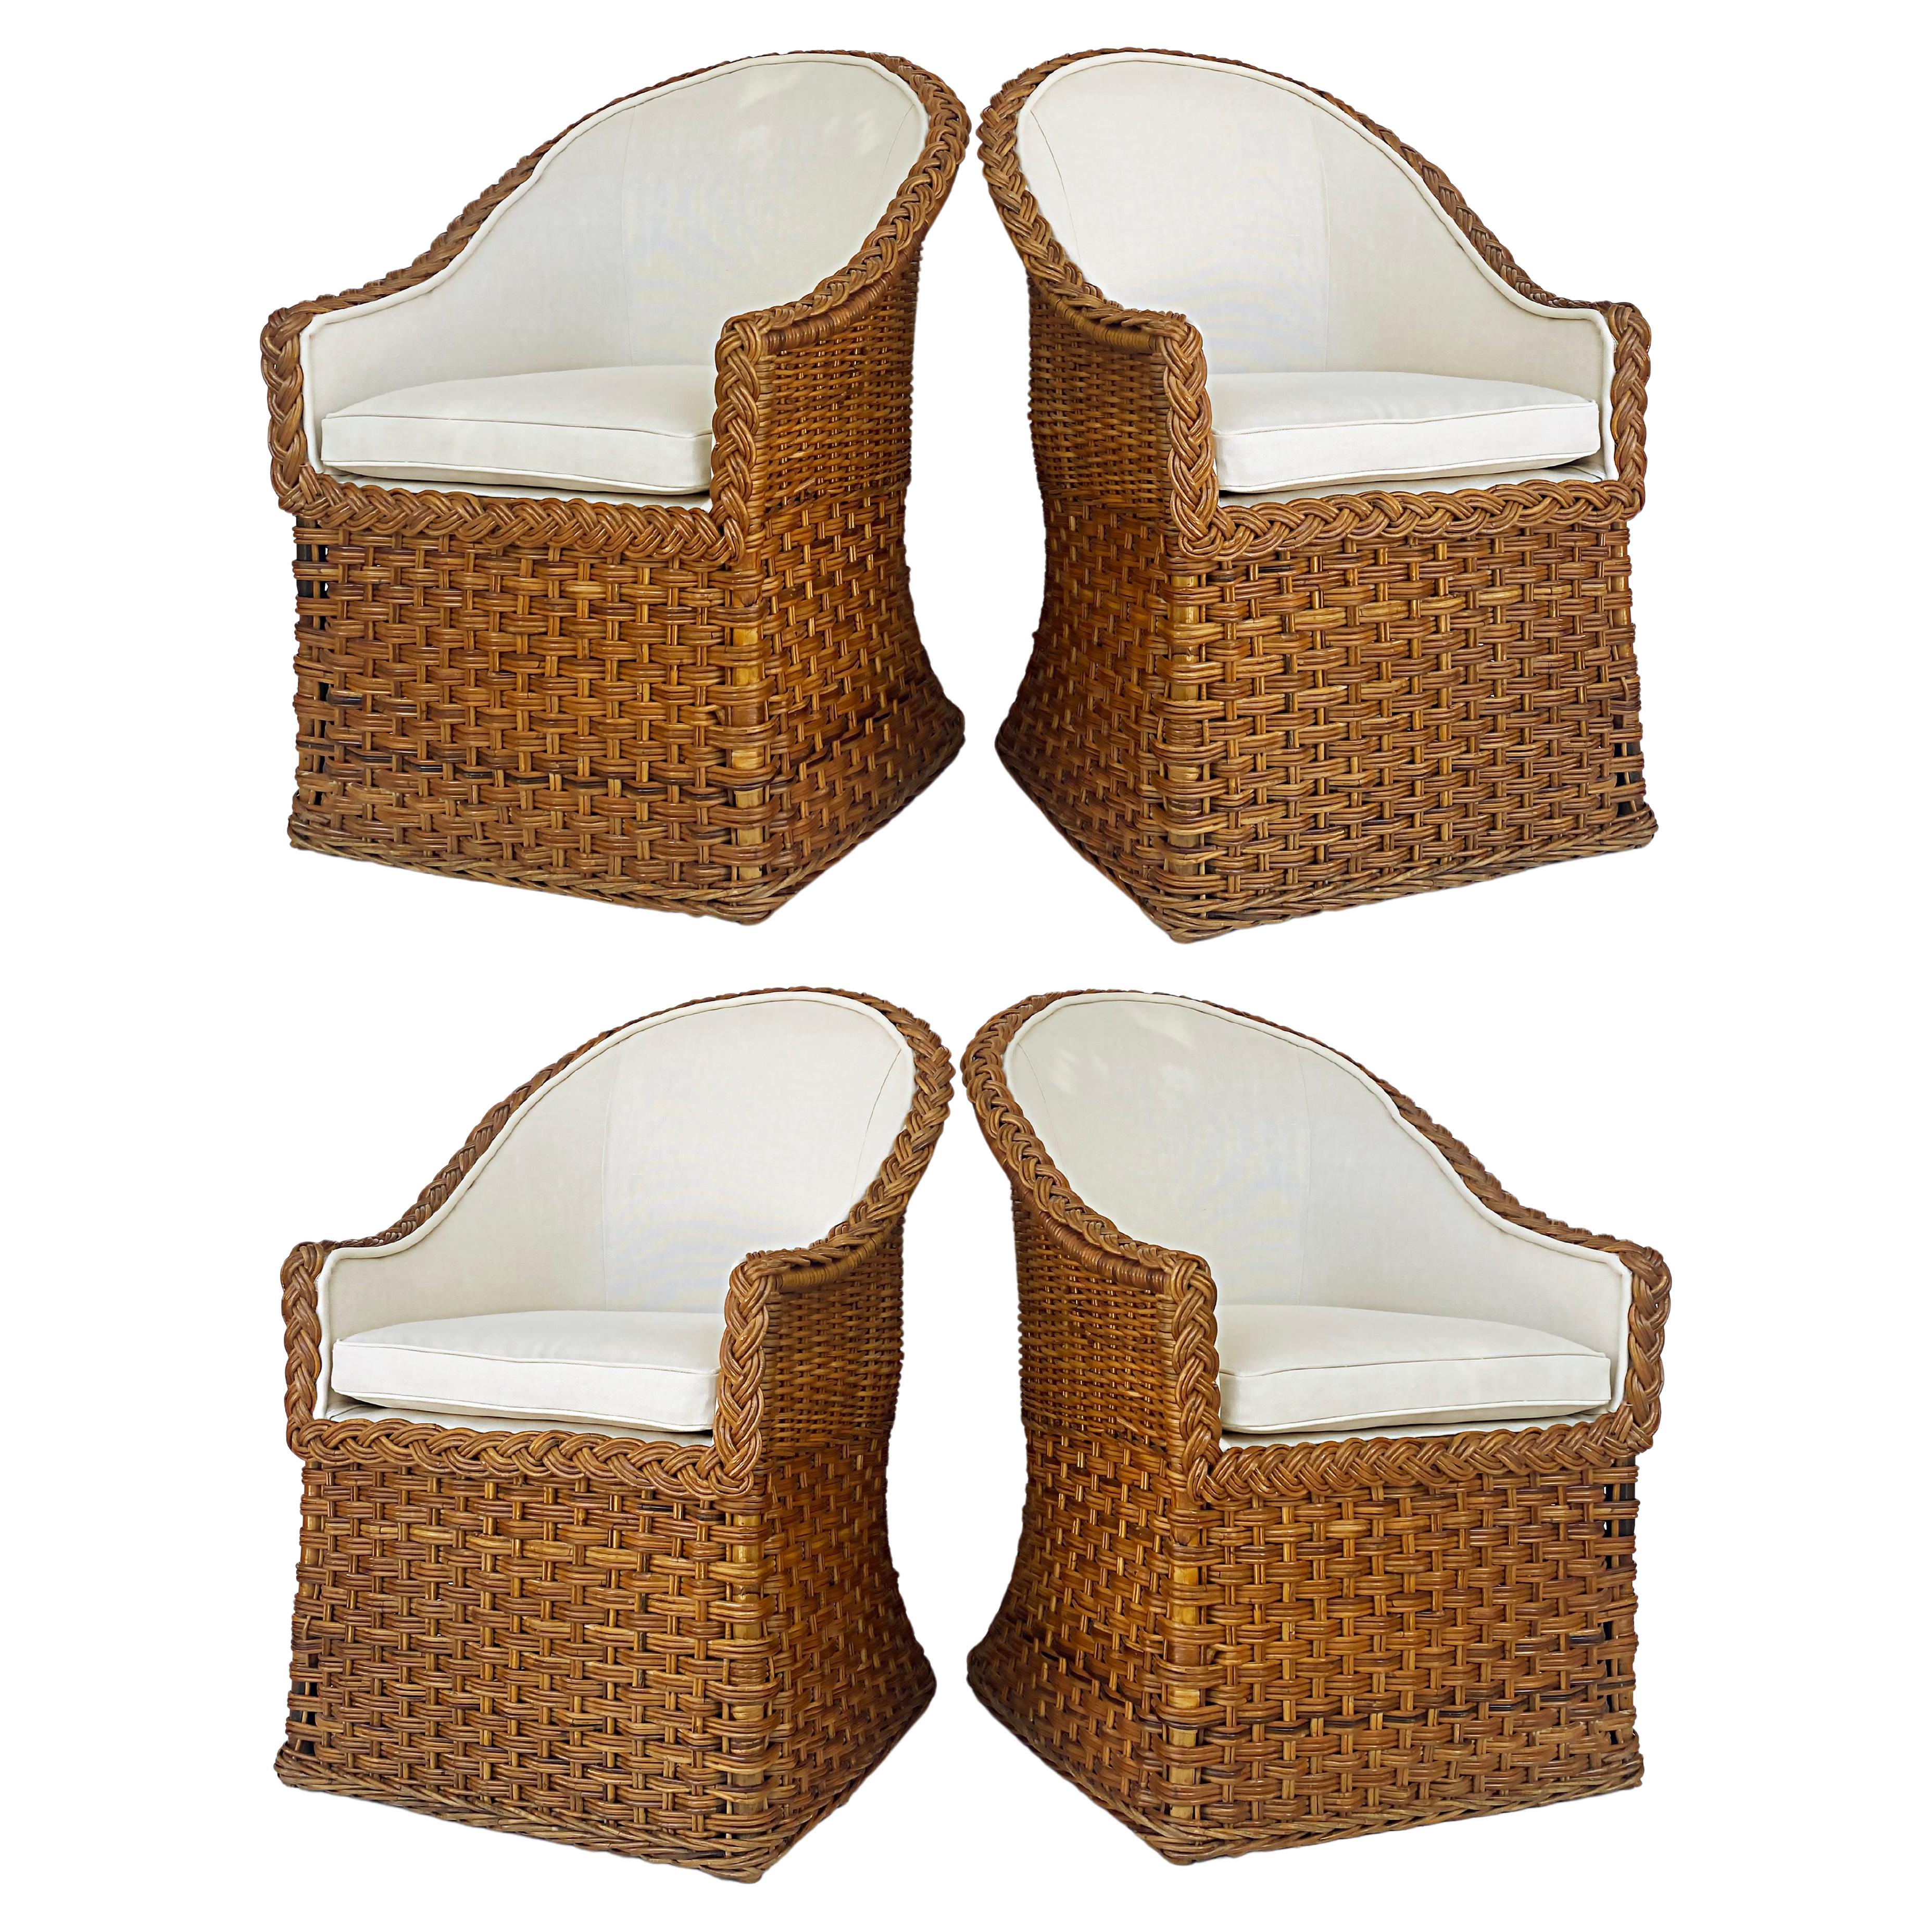 Wicker Works Braided Rattan Club Chairs, New Upholstery, 1 Pair Available For Sale